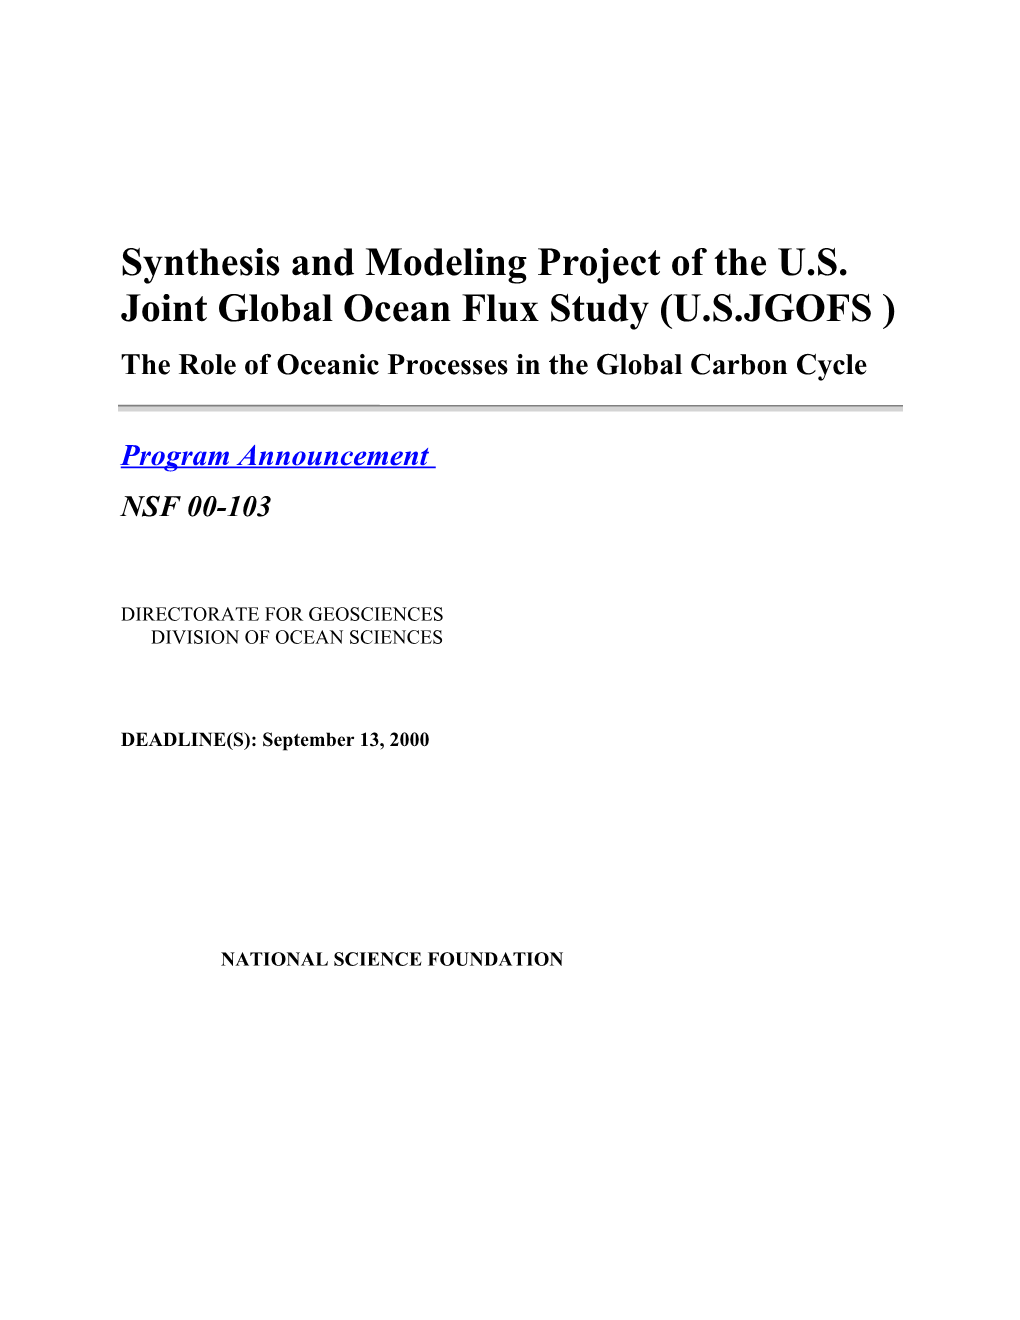 NSF Program Announcement/Solicitation: Synthesis and Modeling Project of the U.S. Joint